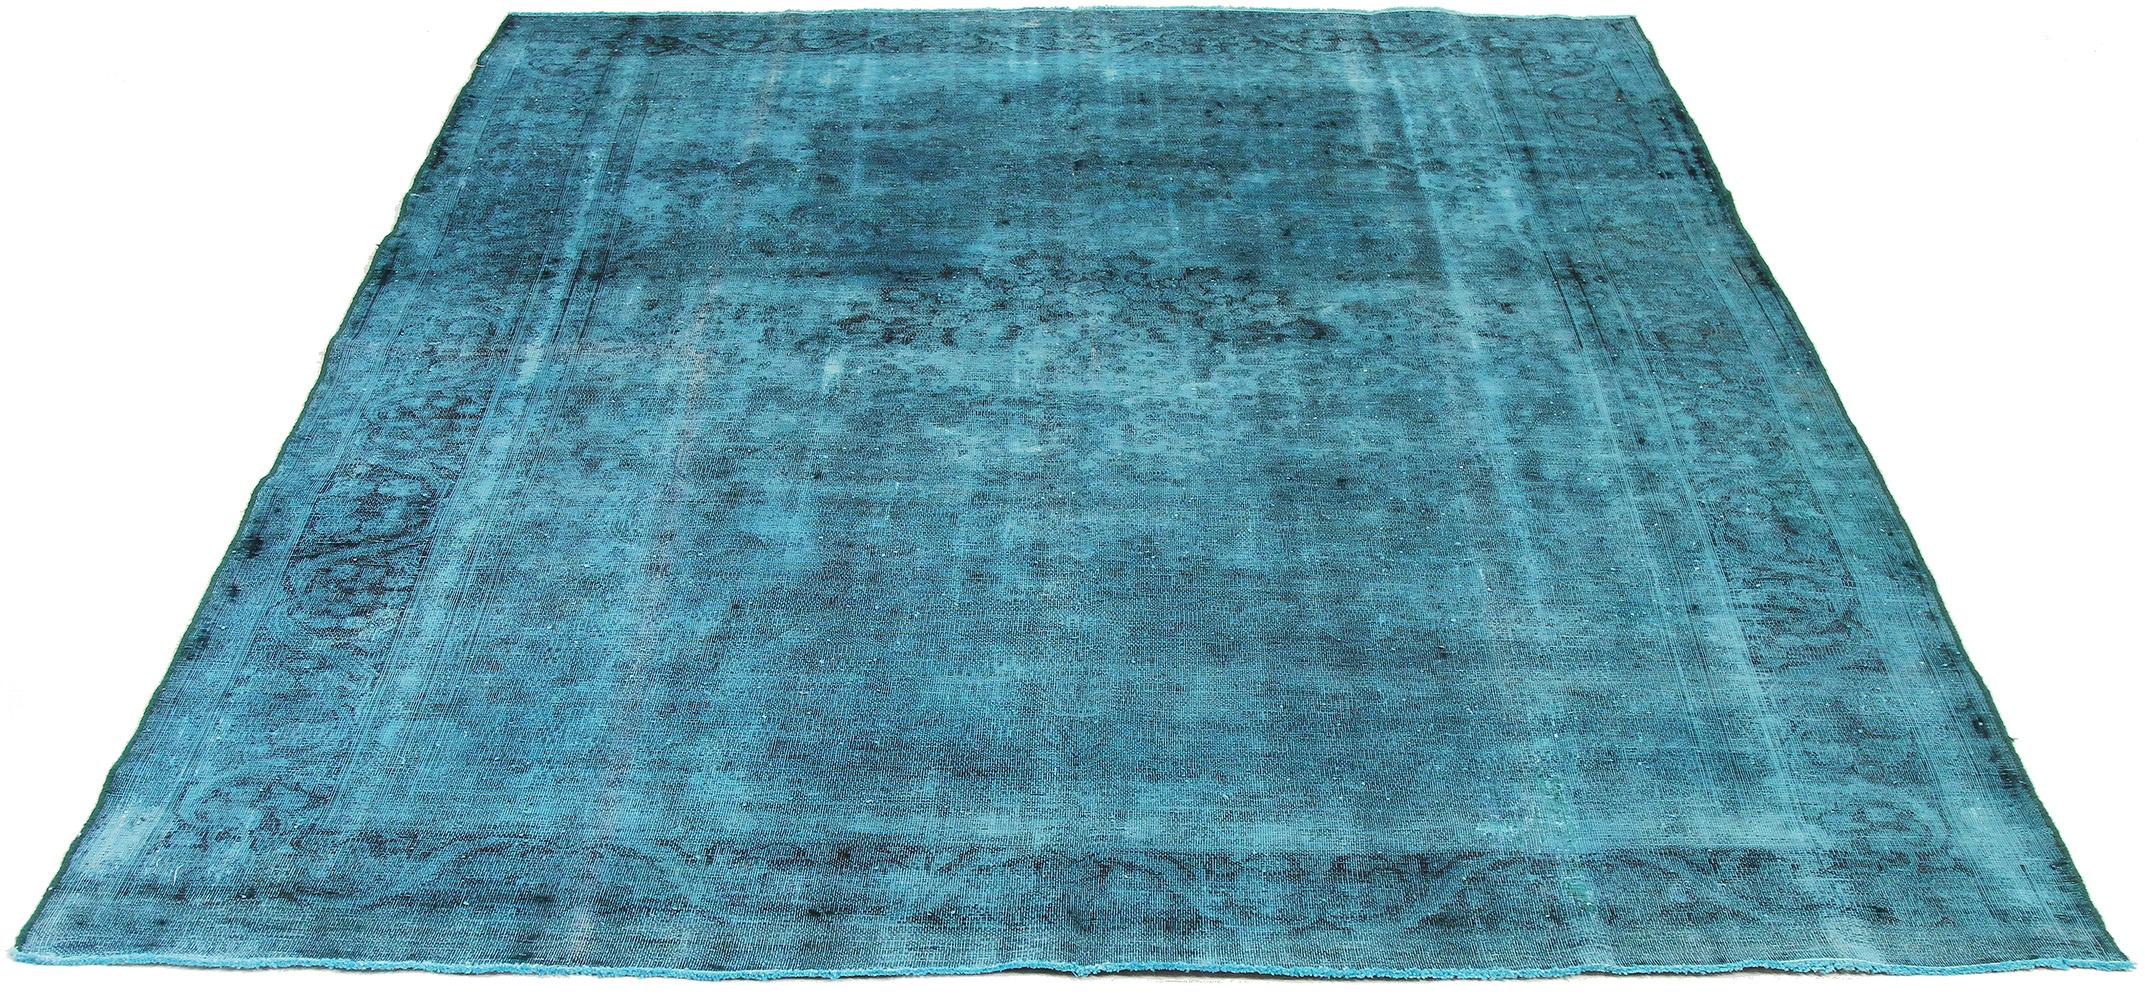 Vintage handmade Persian area rug from high-quality sheep’s wool and colored with eco-friendly vegetable dyes that are proven safe for humans and pets alike. It’s an overdyed piece with faded blue and black botanical details. It has a dimension of